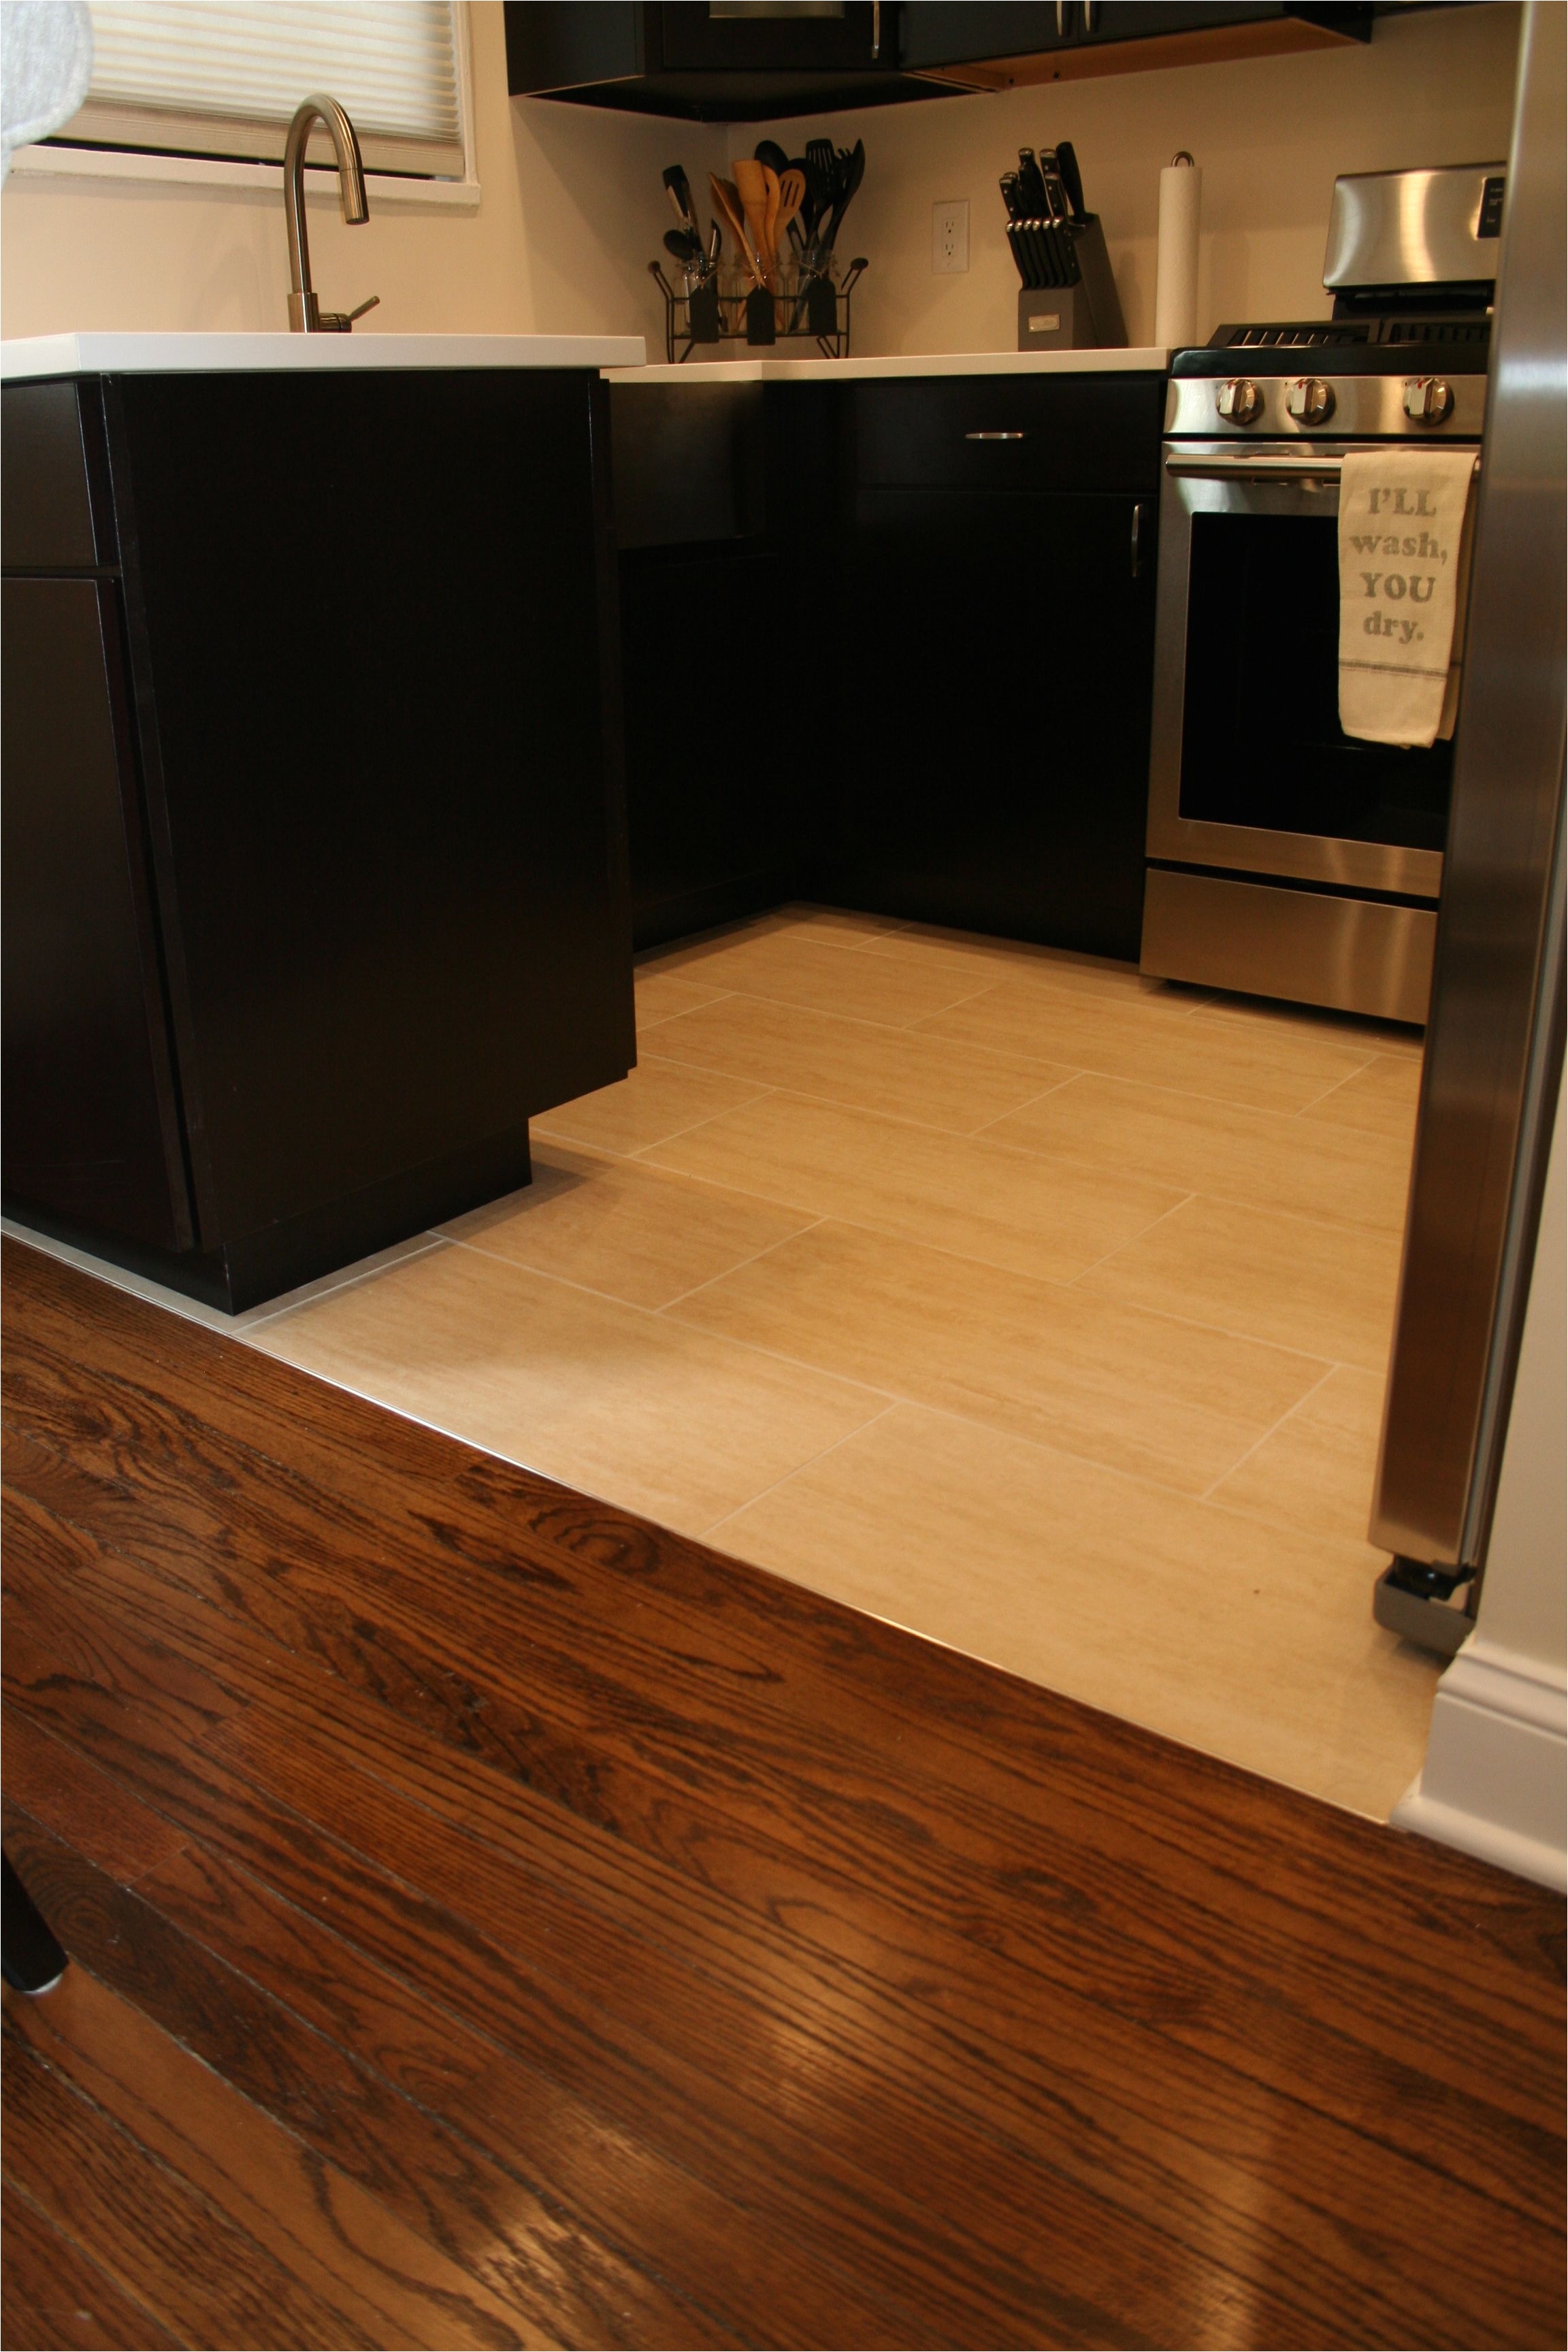 transition from tile to wood floors light to dark flooring http